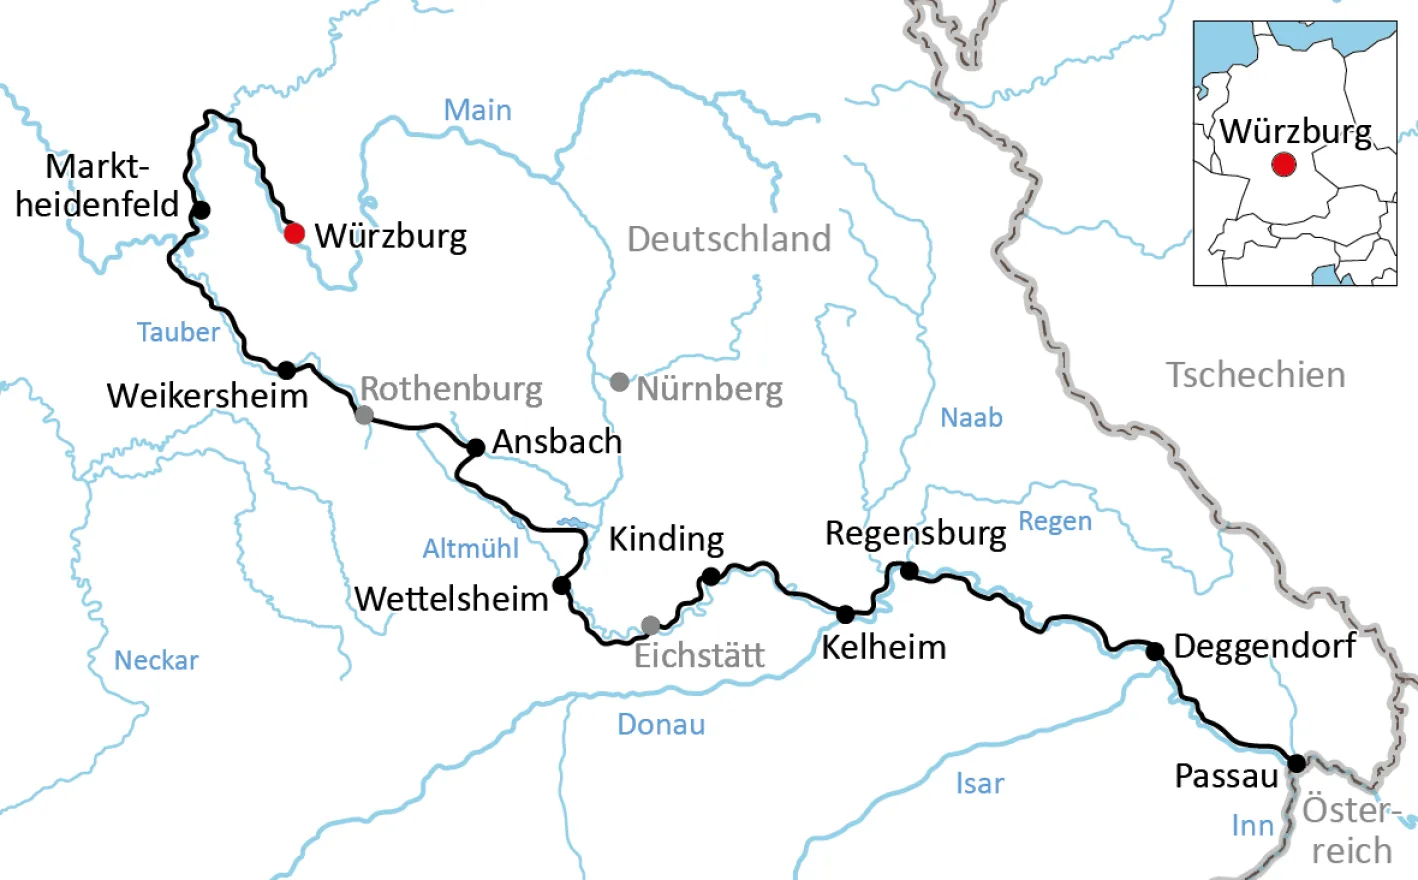 Map for the active bike tour from Würzburg to Passau